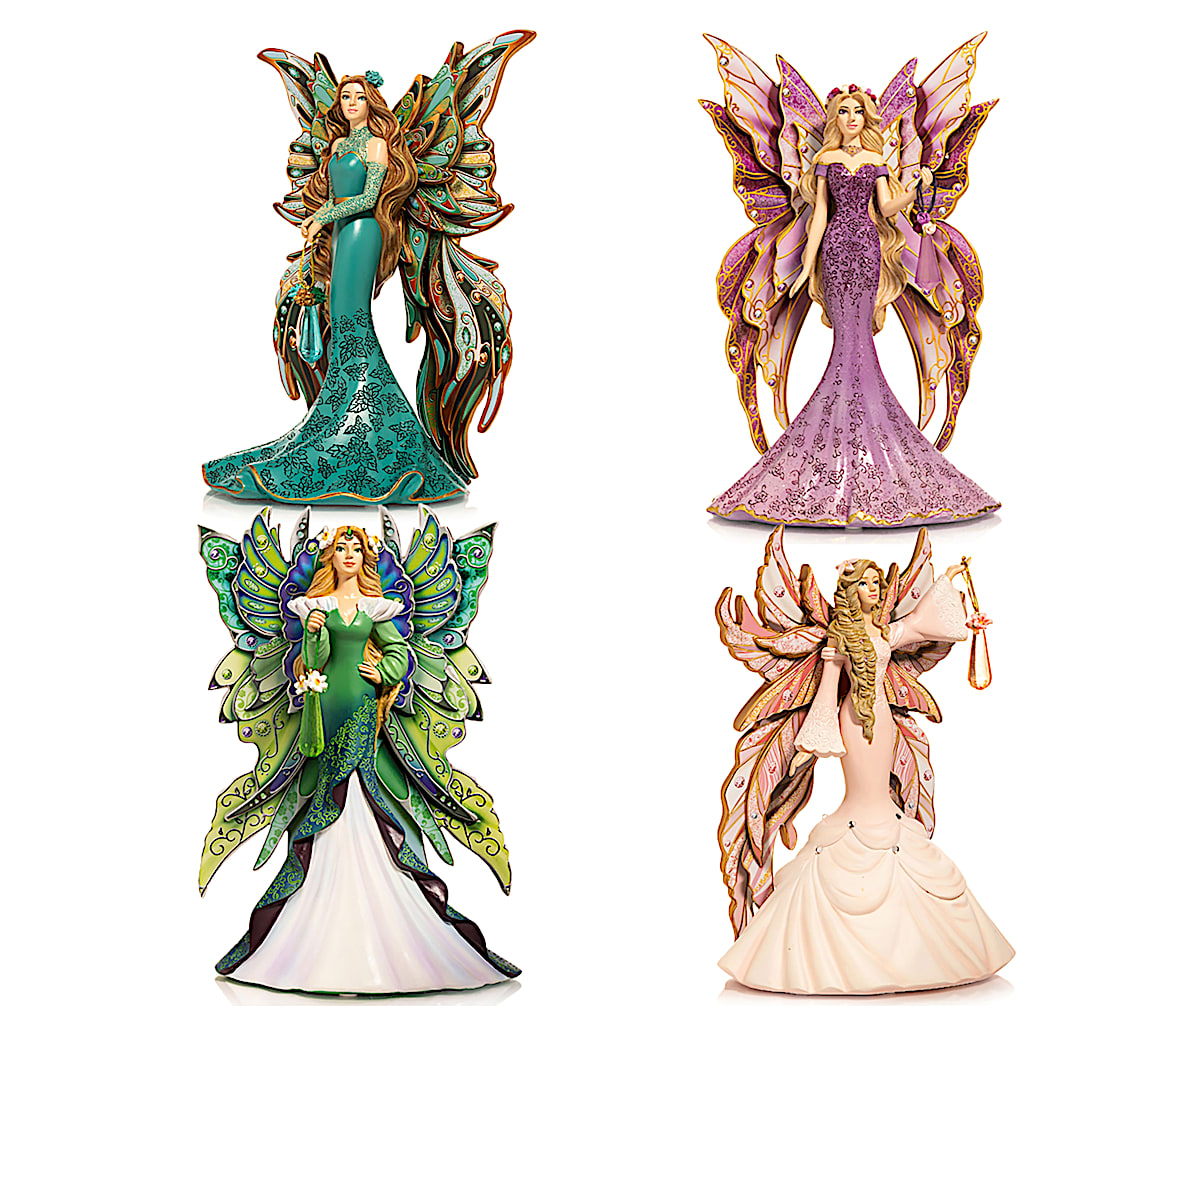 Mystic Crystal Spirits Hand-Painted Fairy Figurine Collection Featuring  Butterfly-Like Layered Wings Inspired By Artist Sara Biddle